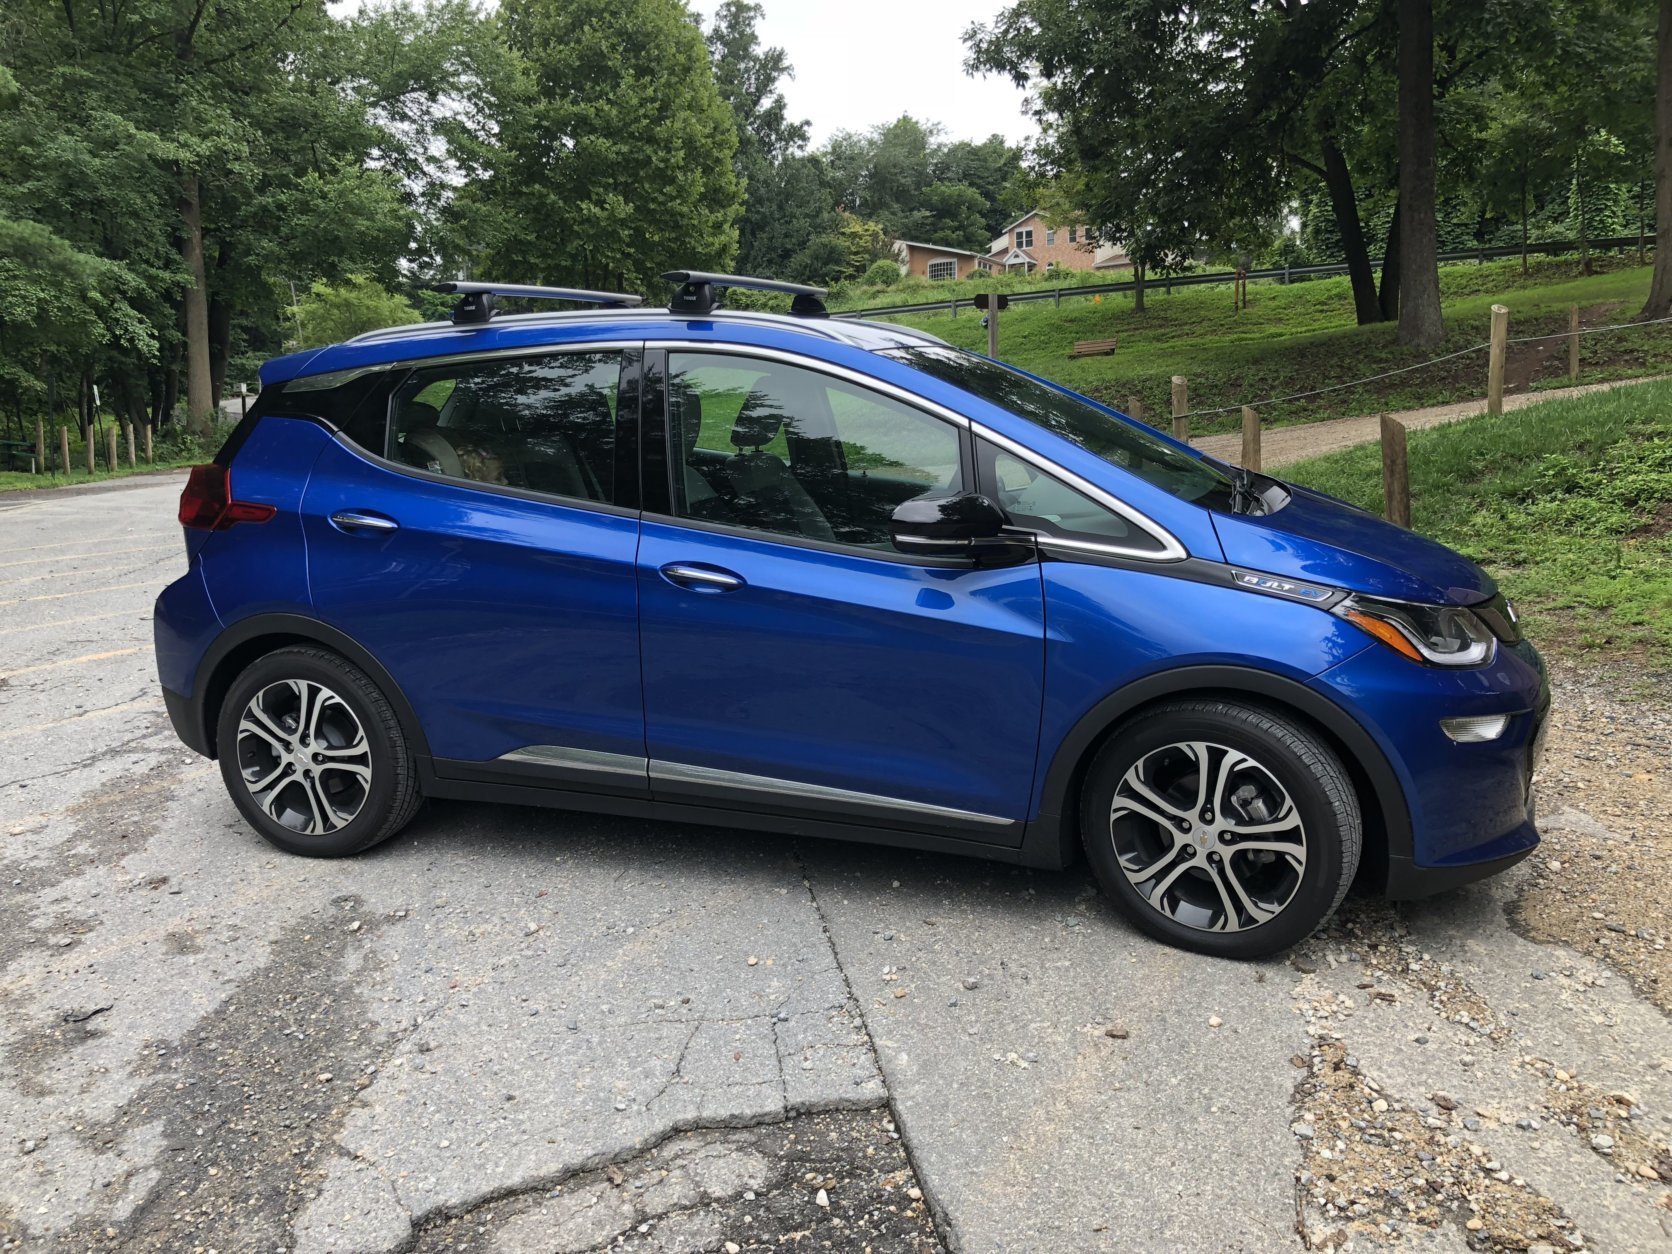 The Chevrolet Bolt EV helps make the electric car a more mass-appeal vehicle. With a range of 230+ miles on a single charge with correct conditions (lower temps and driving style affect range). (WTOP/Mike Parris)